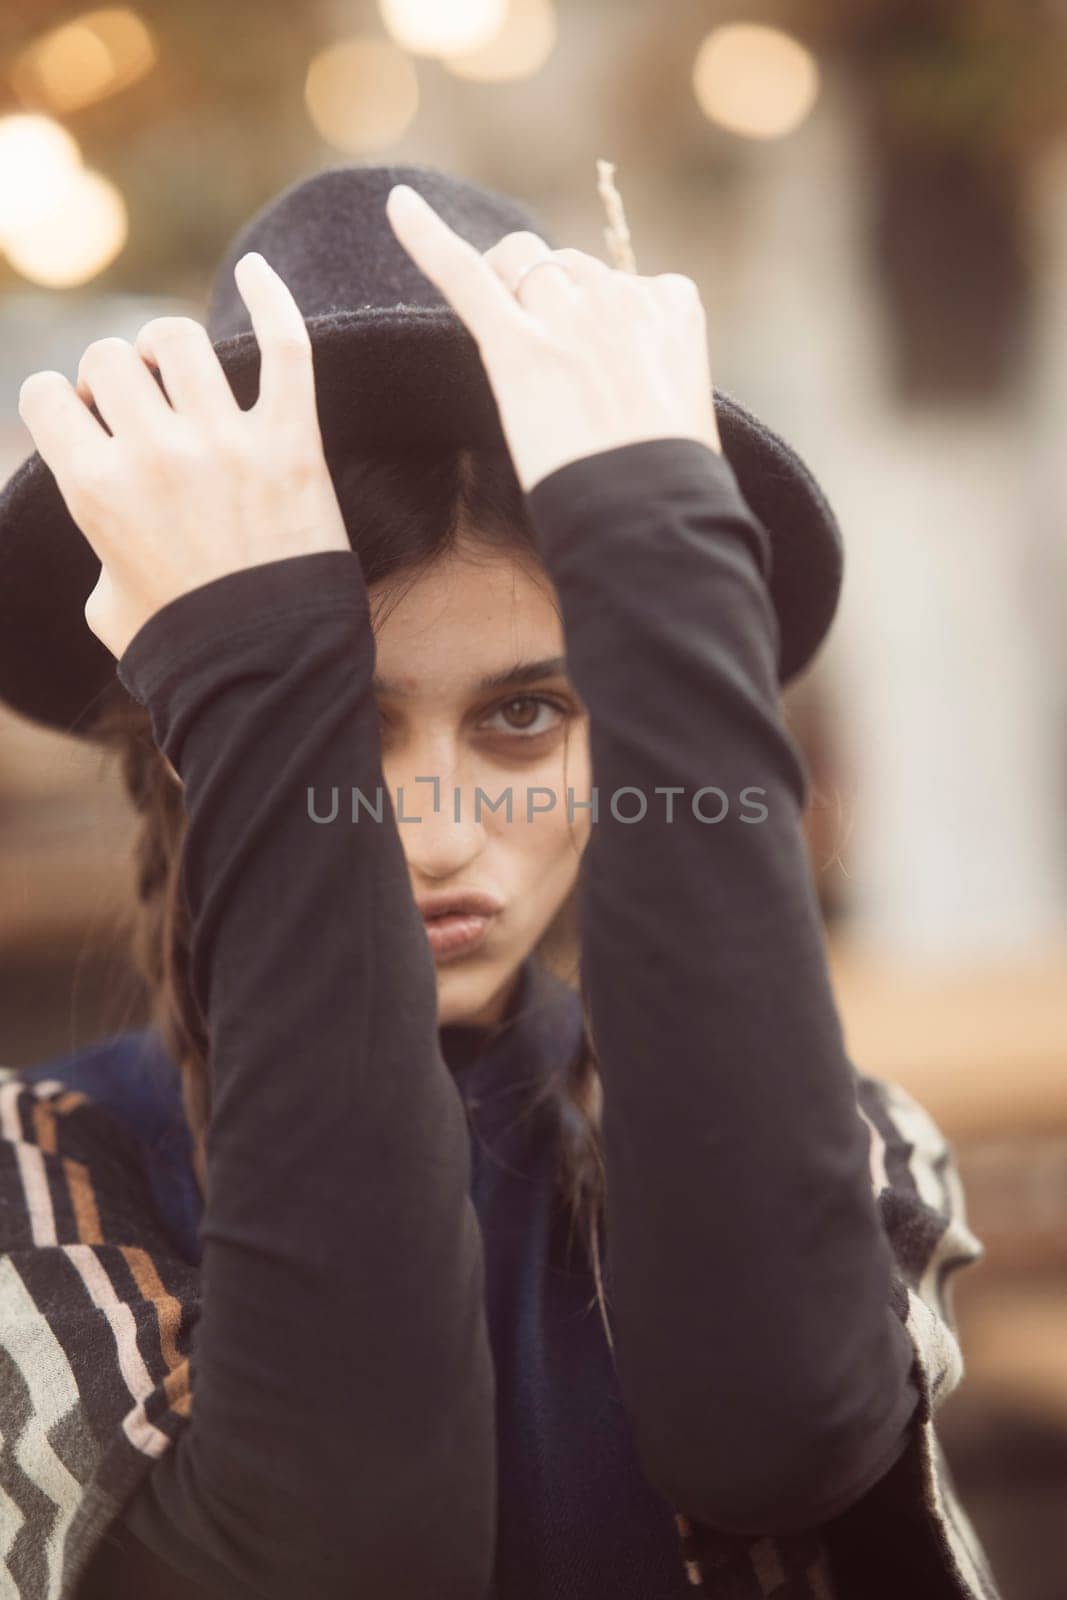 An enchanting portrayal of a trendy young woman embracing retro hippie fashion. High quality photo